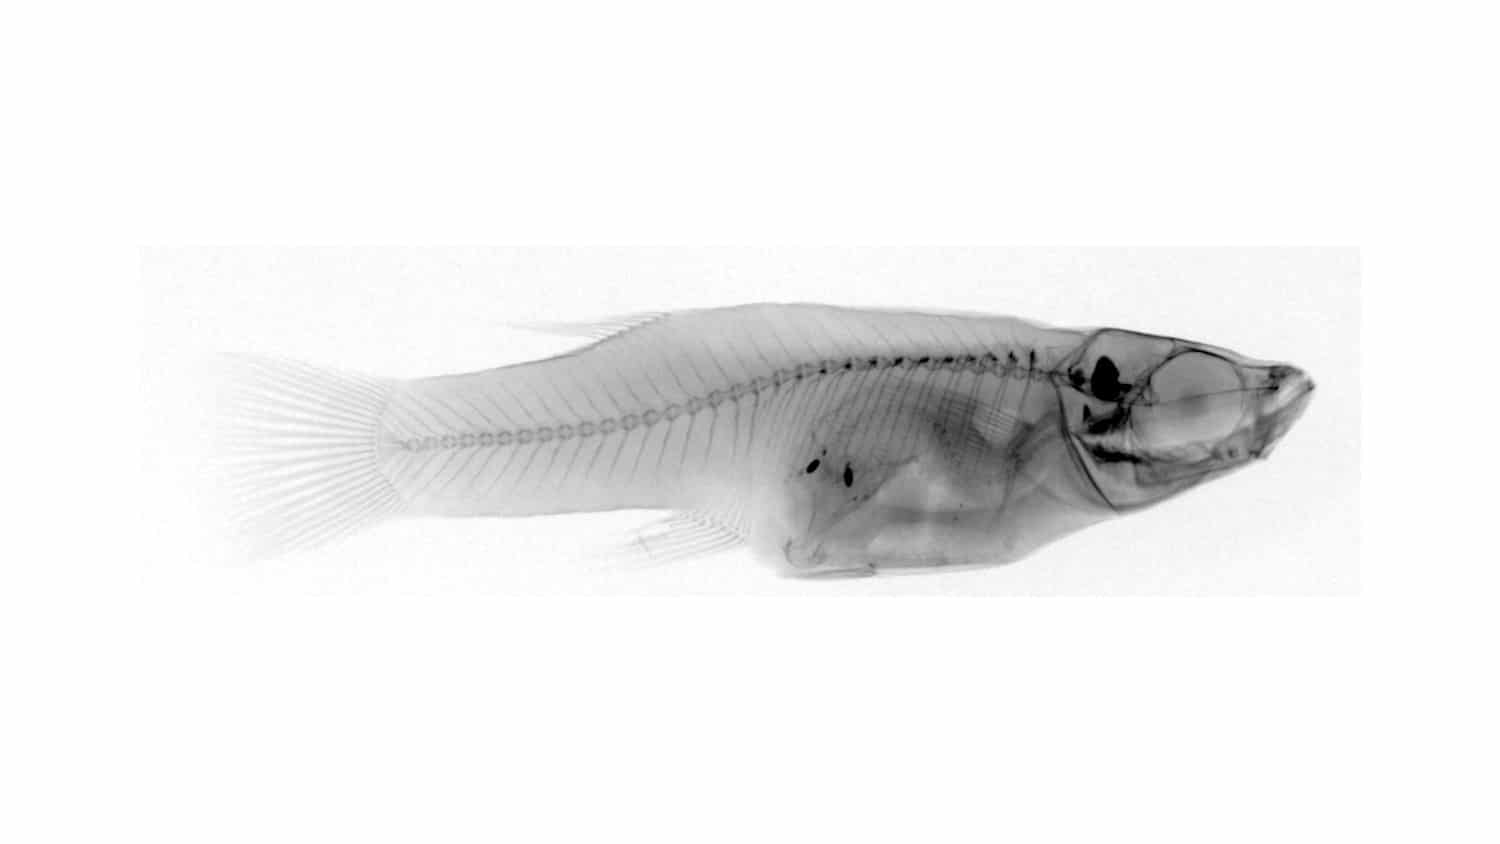 X-ray image of an adult female Bahamas mosquitofish where a fish she had eaten can be seen inside of her, revealing an occurrence of cannibalism.